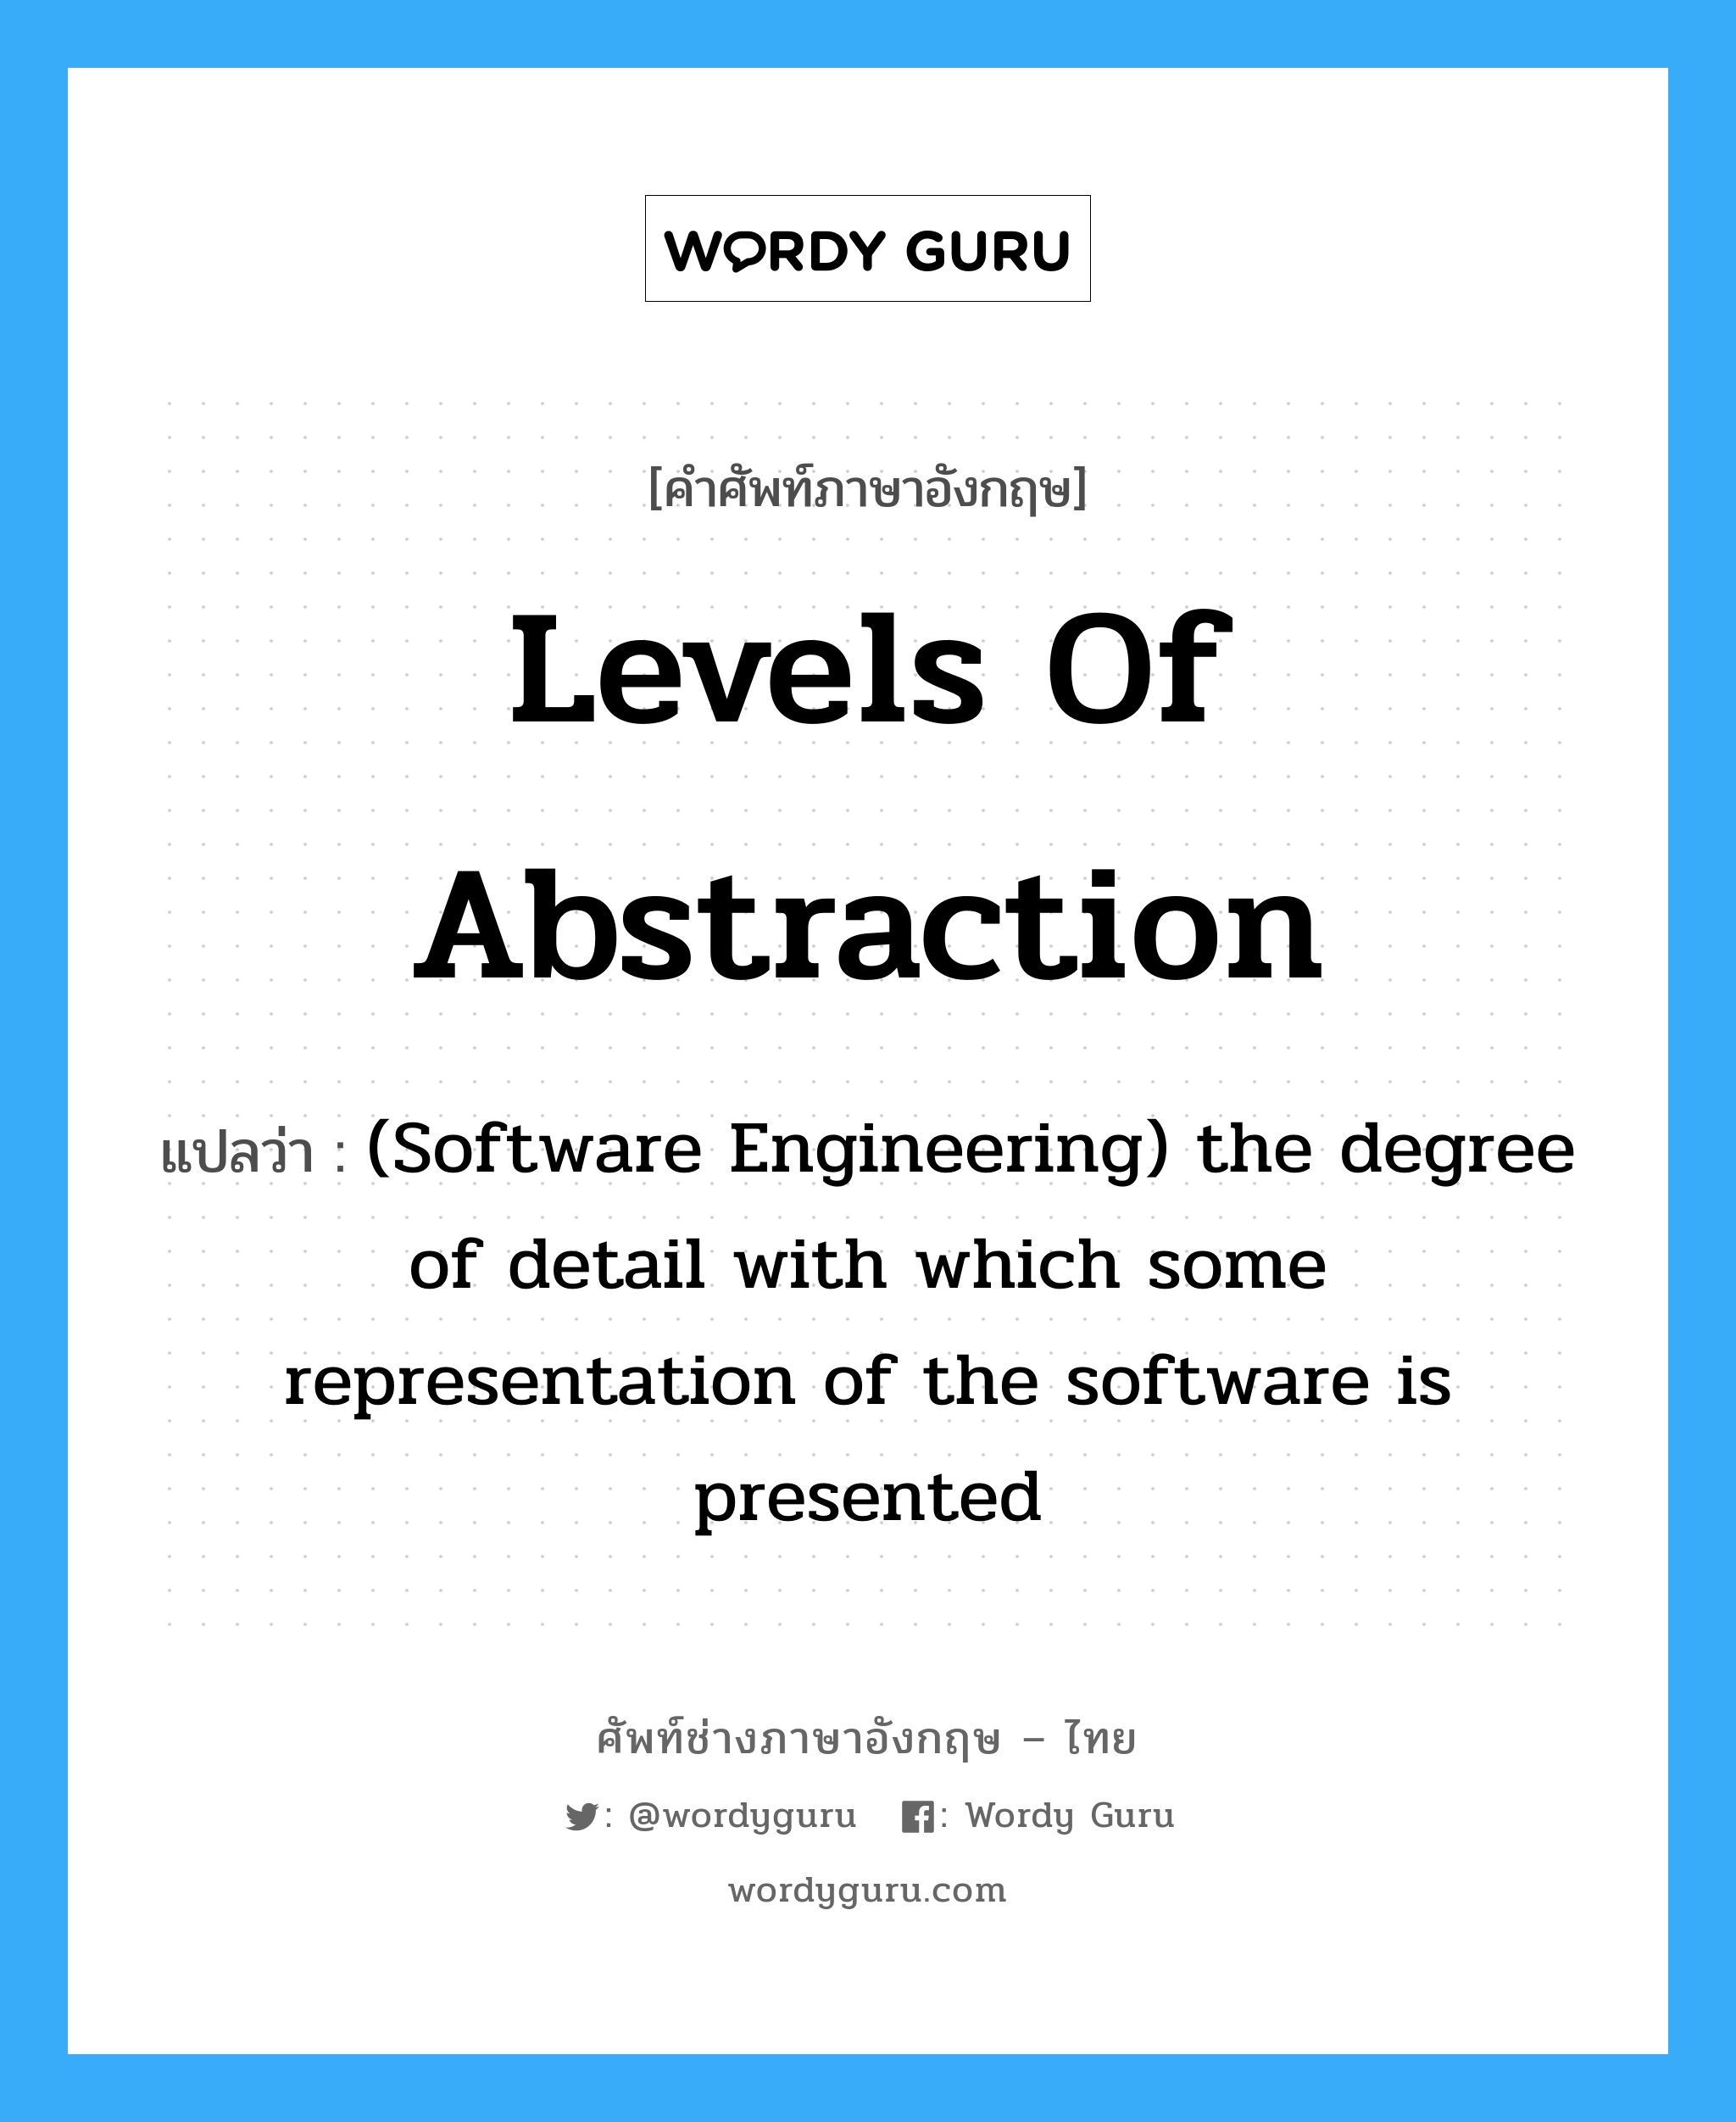 Levels of abstraction แปลว่า?, คำศัพท์ช่างภาษาอังกฤษ - ไทย Levels of abstraction คำศัพท์ภาษาอังกฤษ Levels of abstraction แปลว่า (Software Engineering) the degree of detail with which some representation of the software is presented